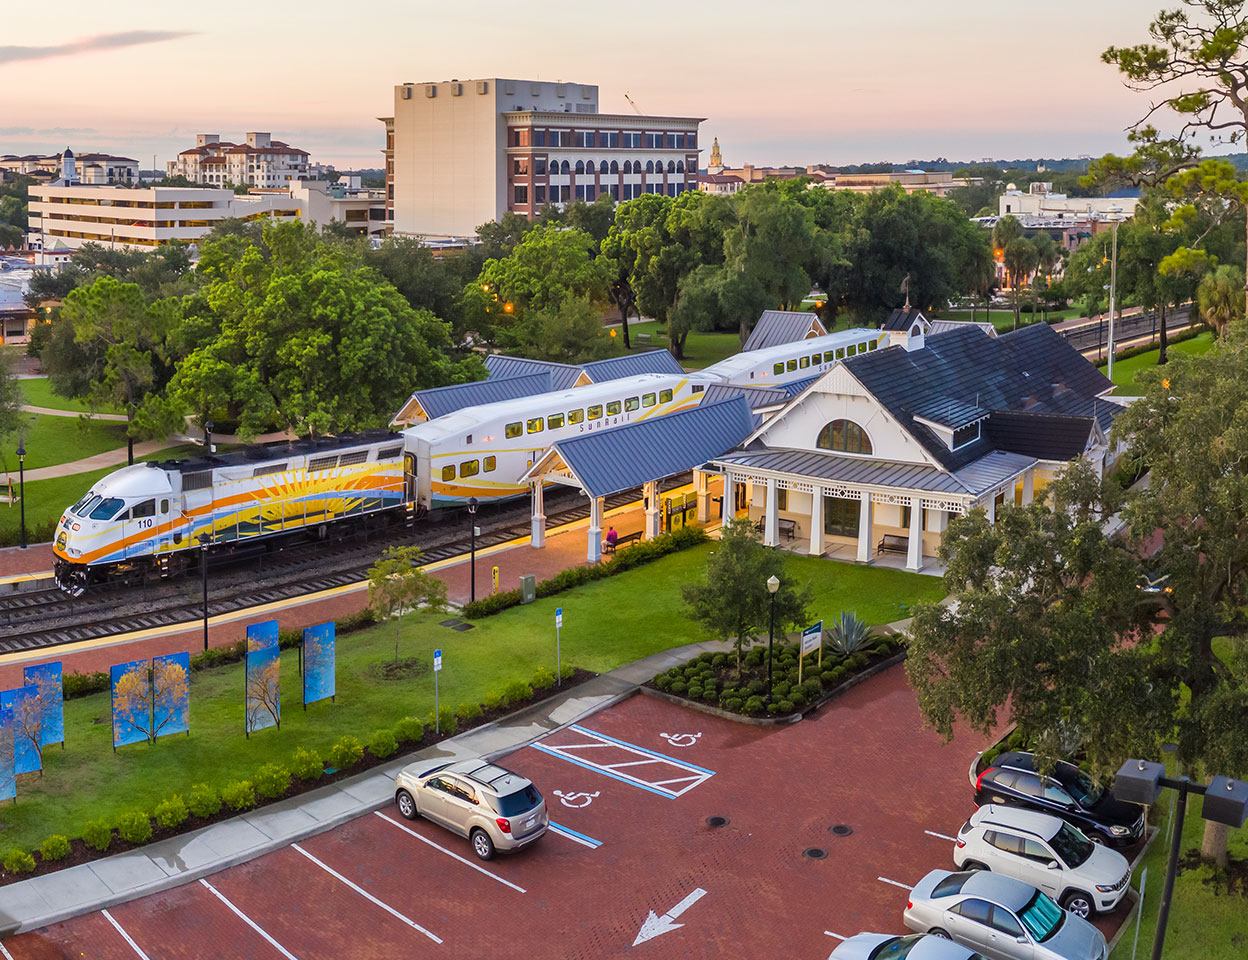 SunRail Train at Winter Park Station with parking lot ADA parking spots.